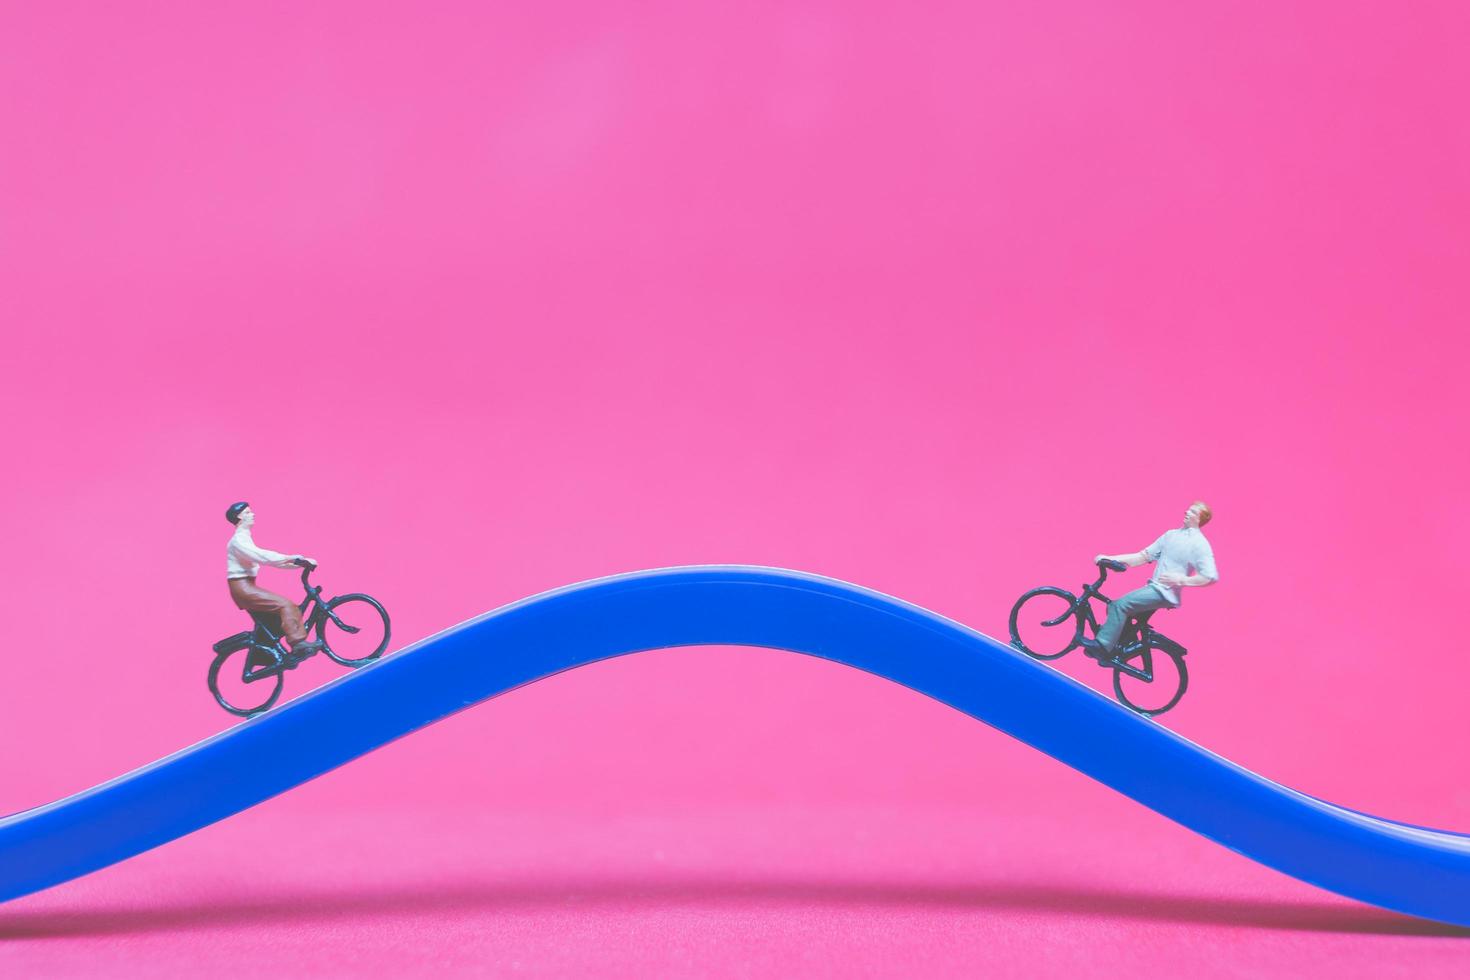 Miniature travelers with bicycles on a blue bridge on a pink background photo